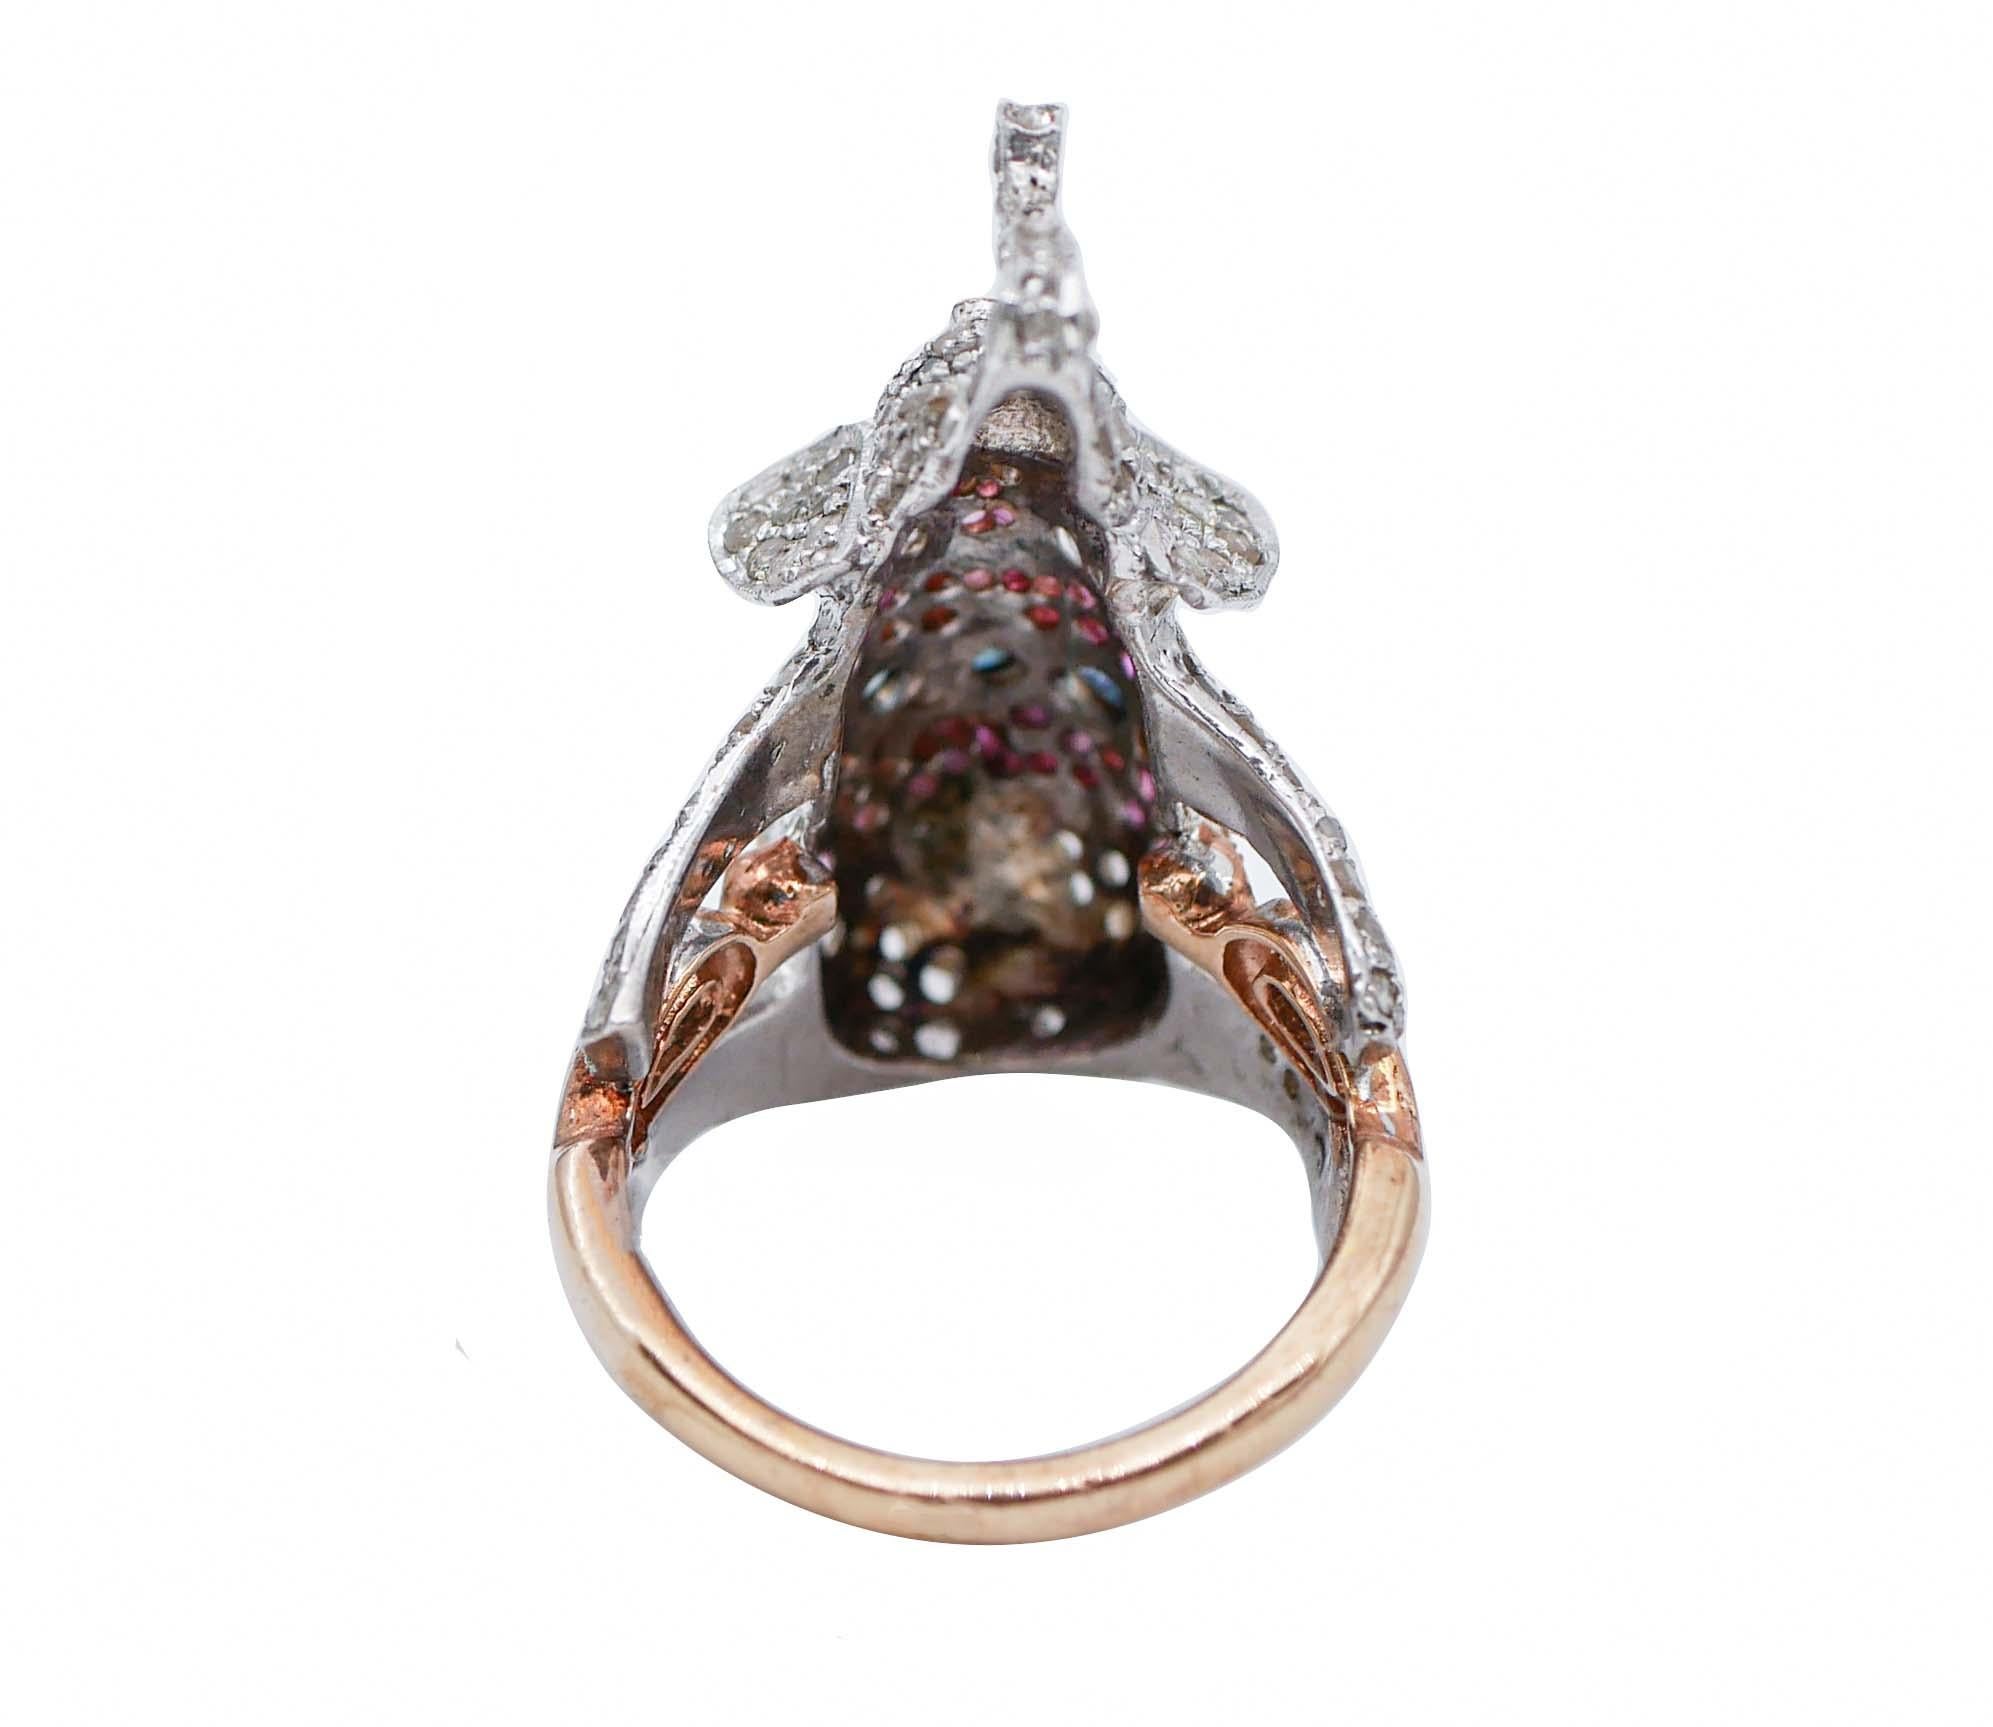 Retro Sapphires, Rubies, Diamonds, Rose Gold and Silver Elephant Ring